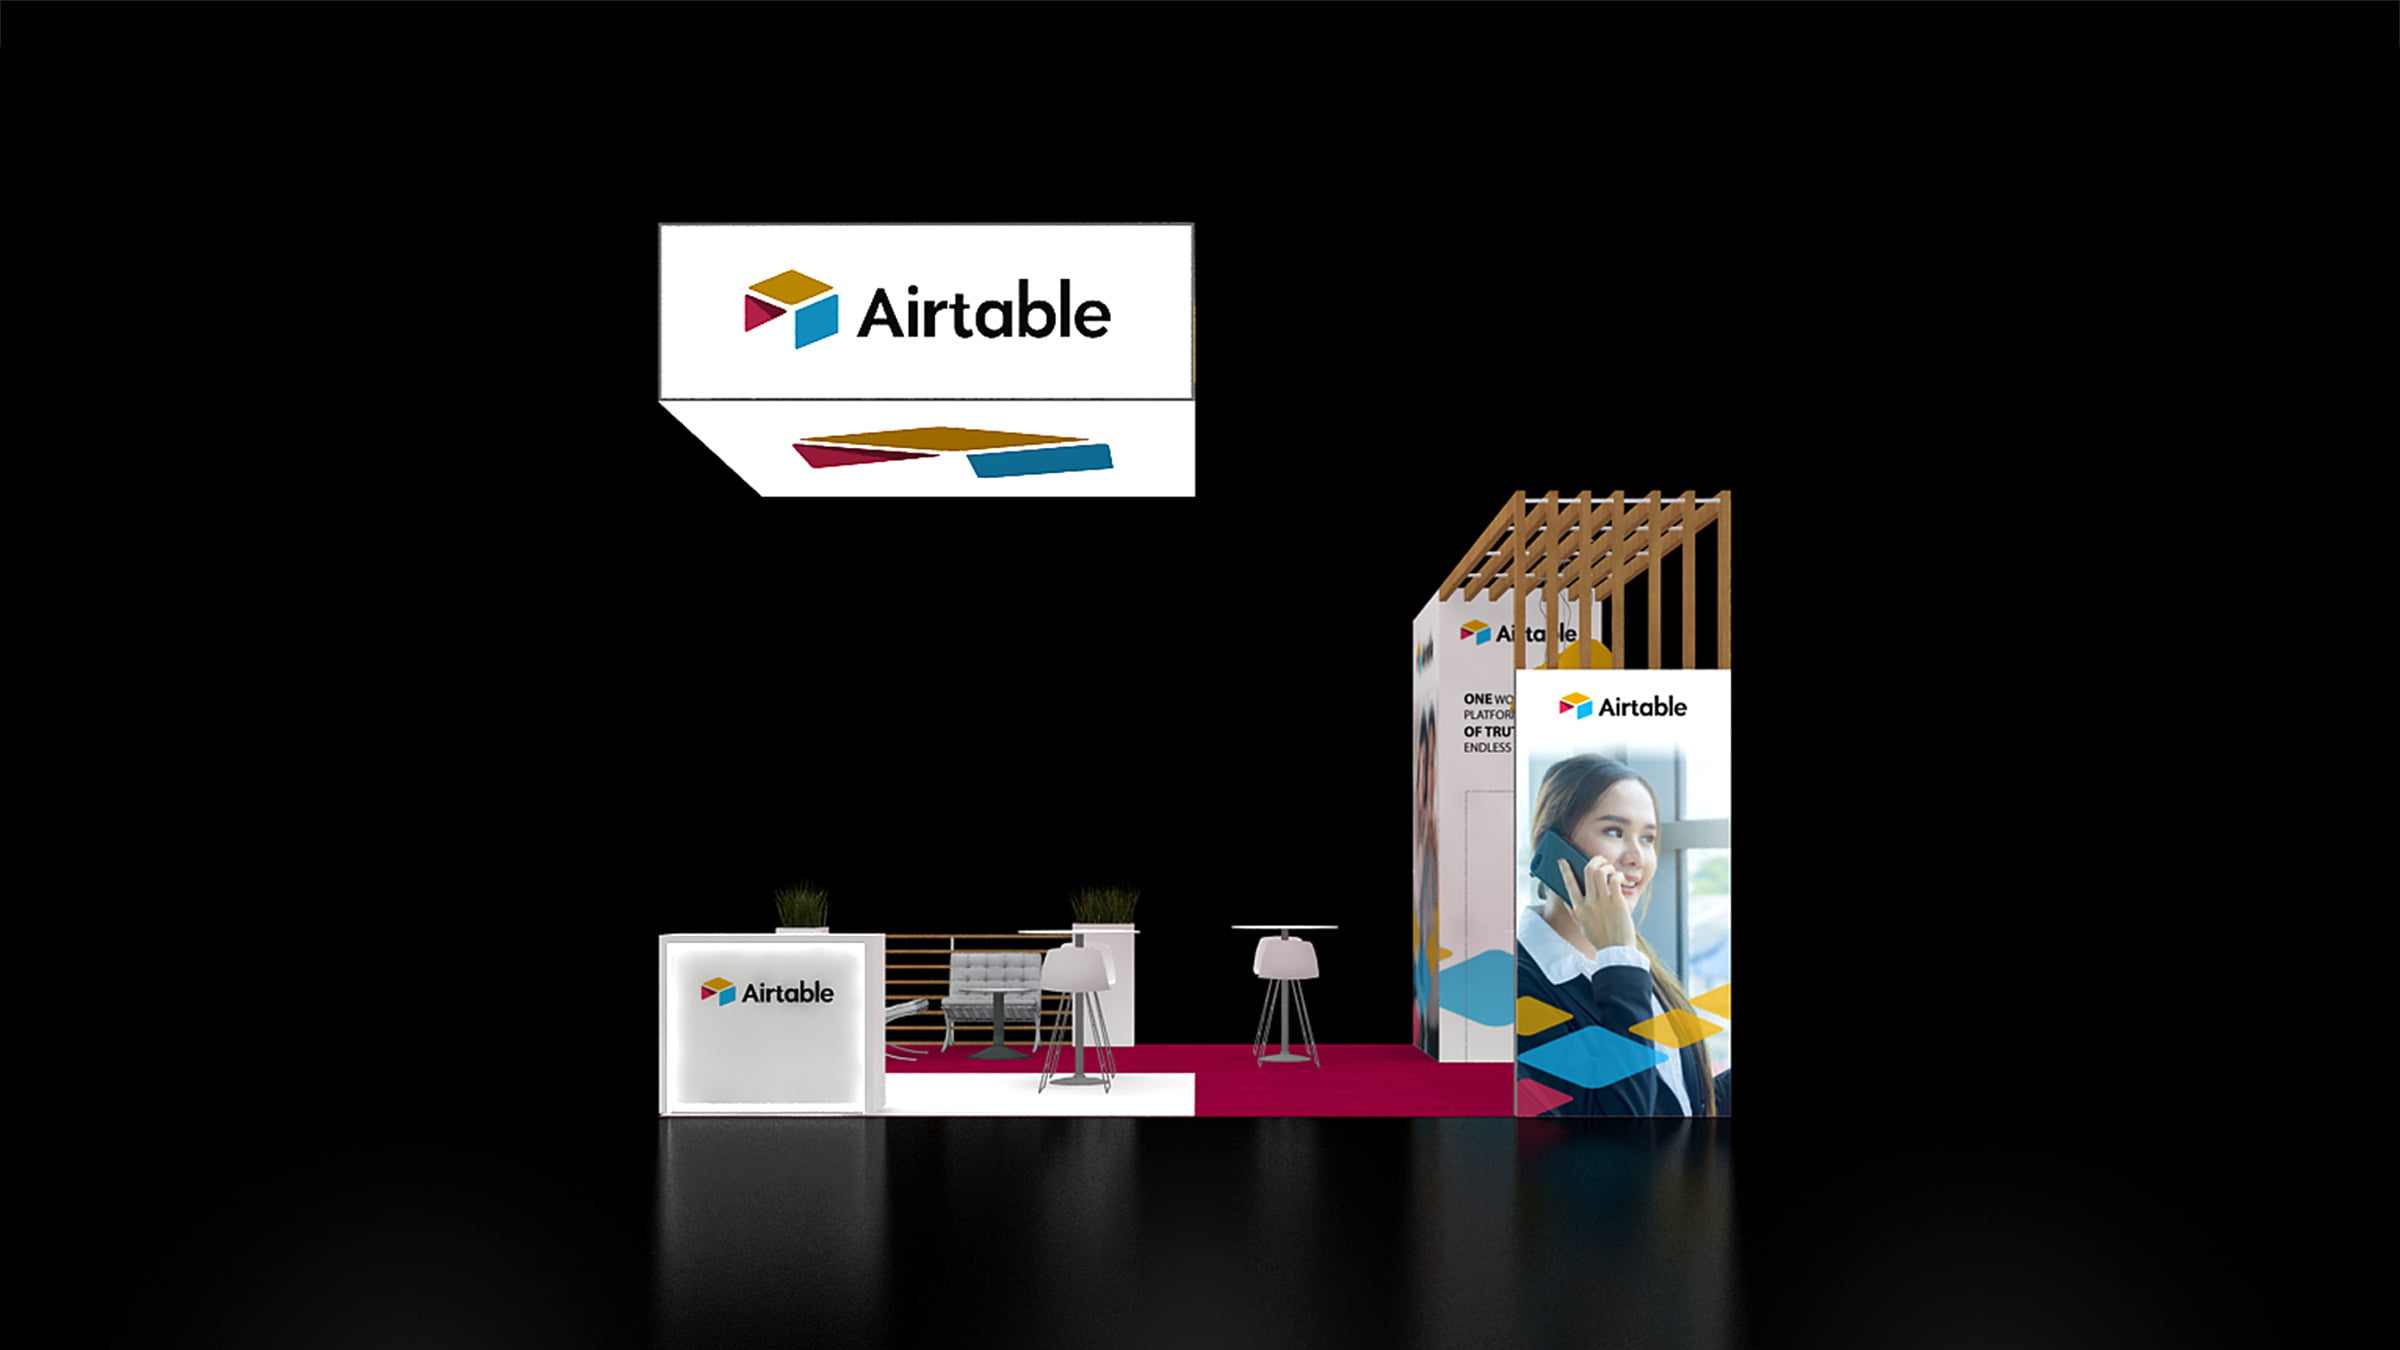 Exhibition booth design, Best trade show booths, Modular Exhibits, Custom Trade Show, Custom Trade Show Booth, Trade Show Booth Design